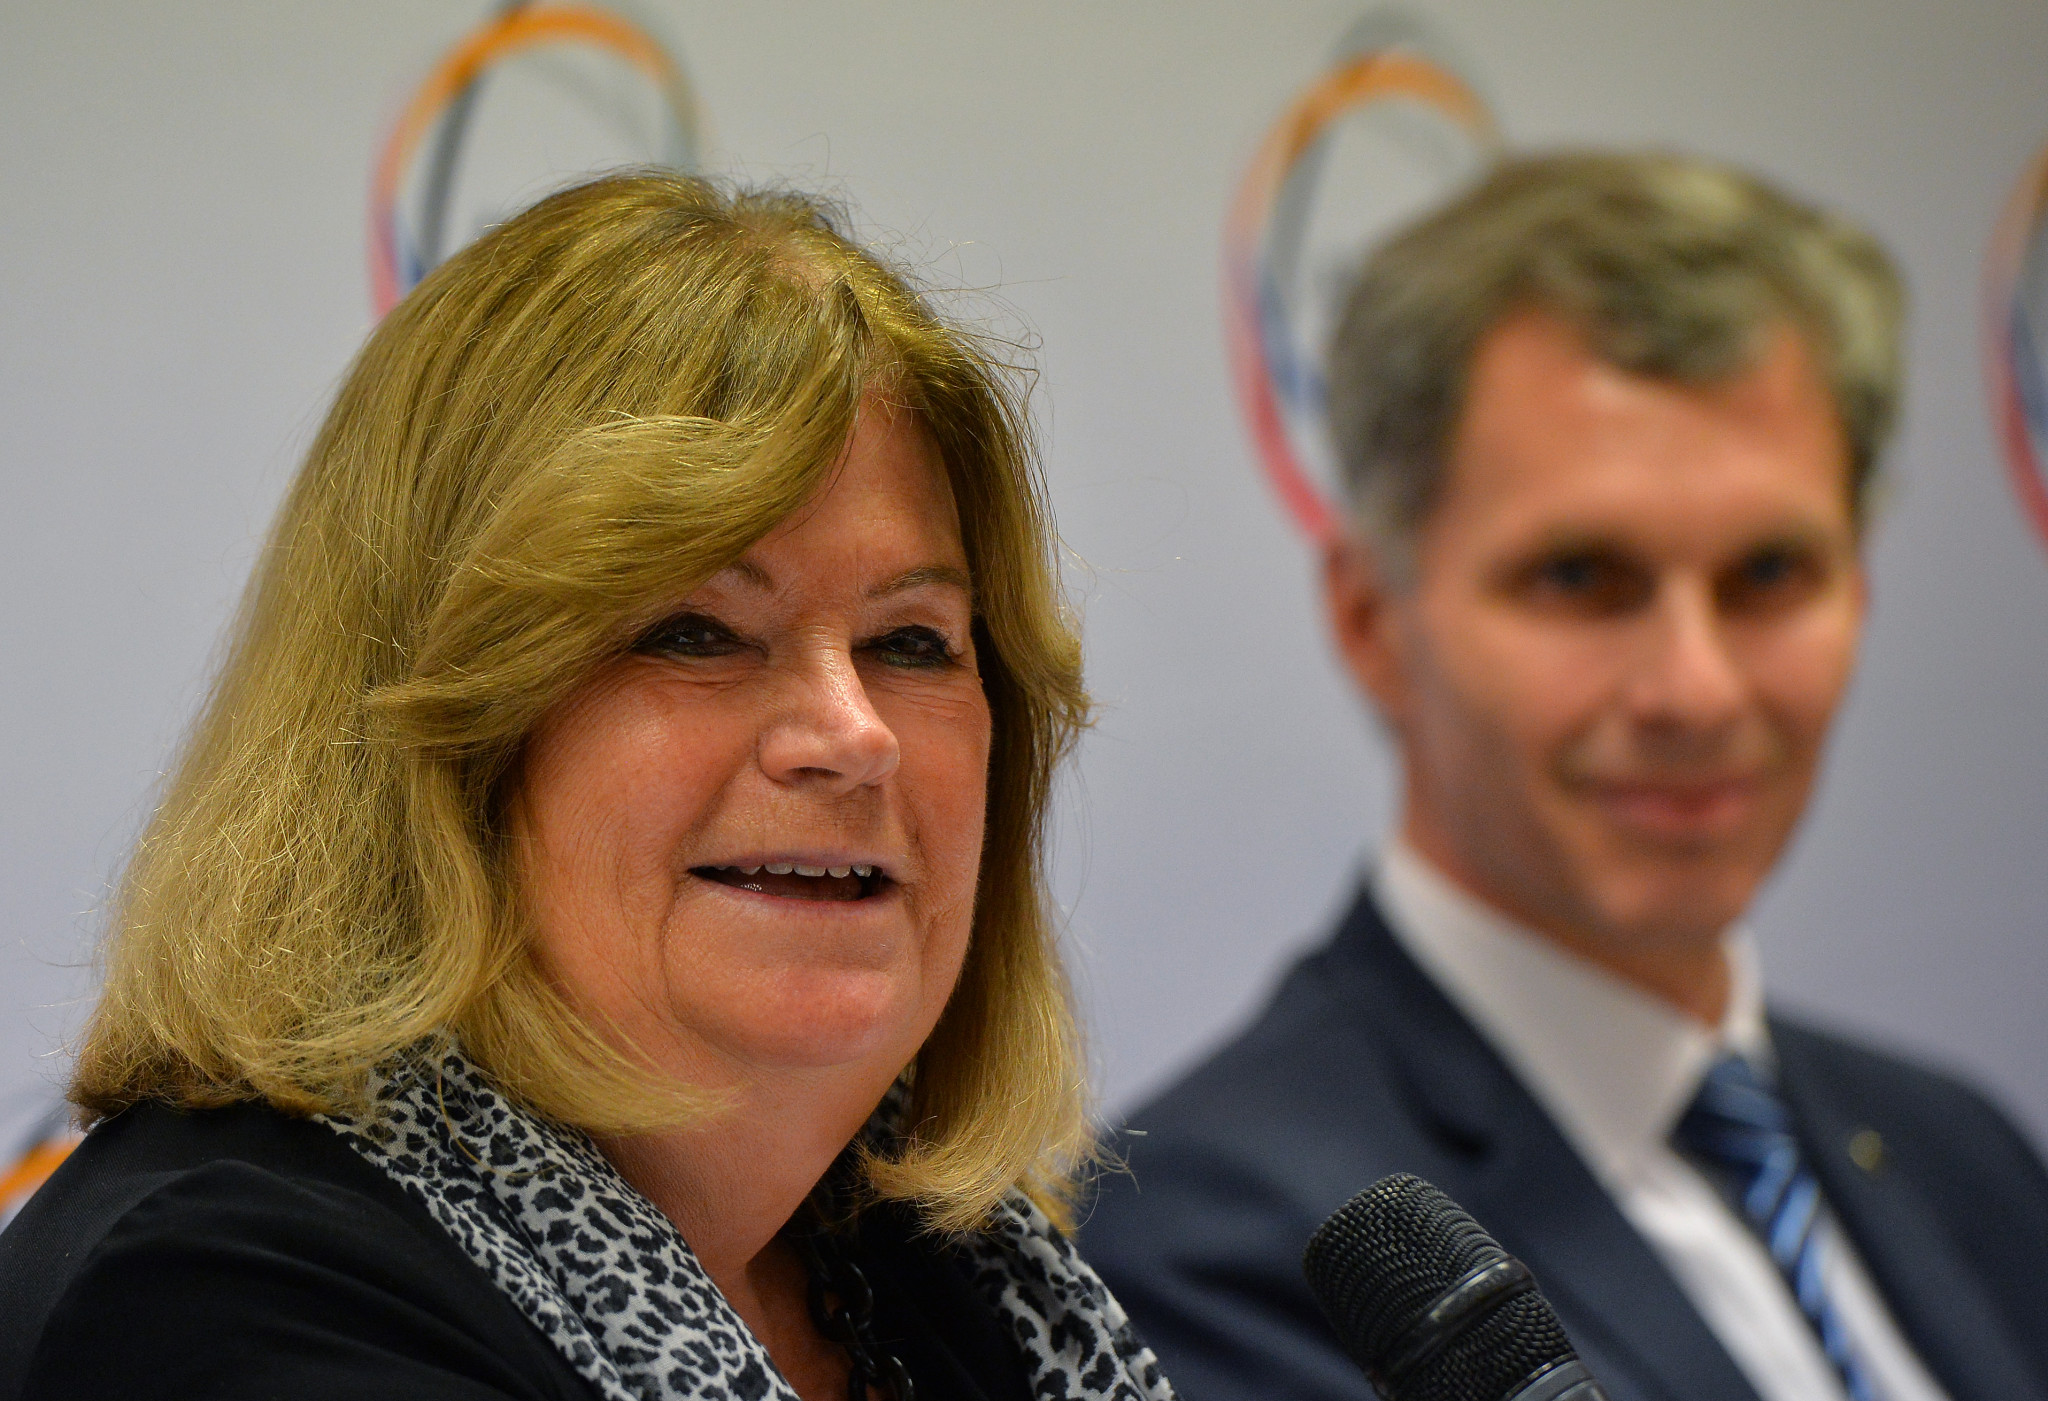 IOC coordination commission Chairman Gunilla Lindberg remains confident the Games will be memorable  for athletes and fans alike ©Getty Images